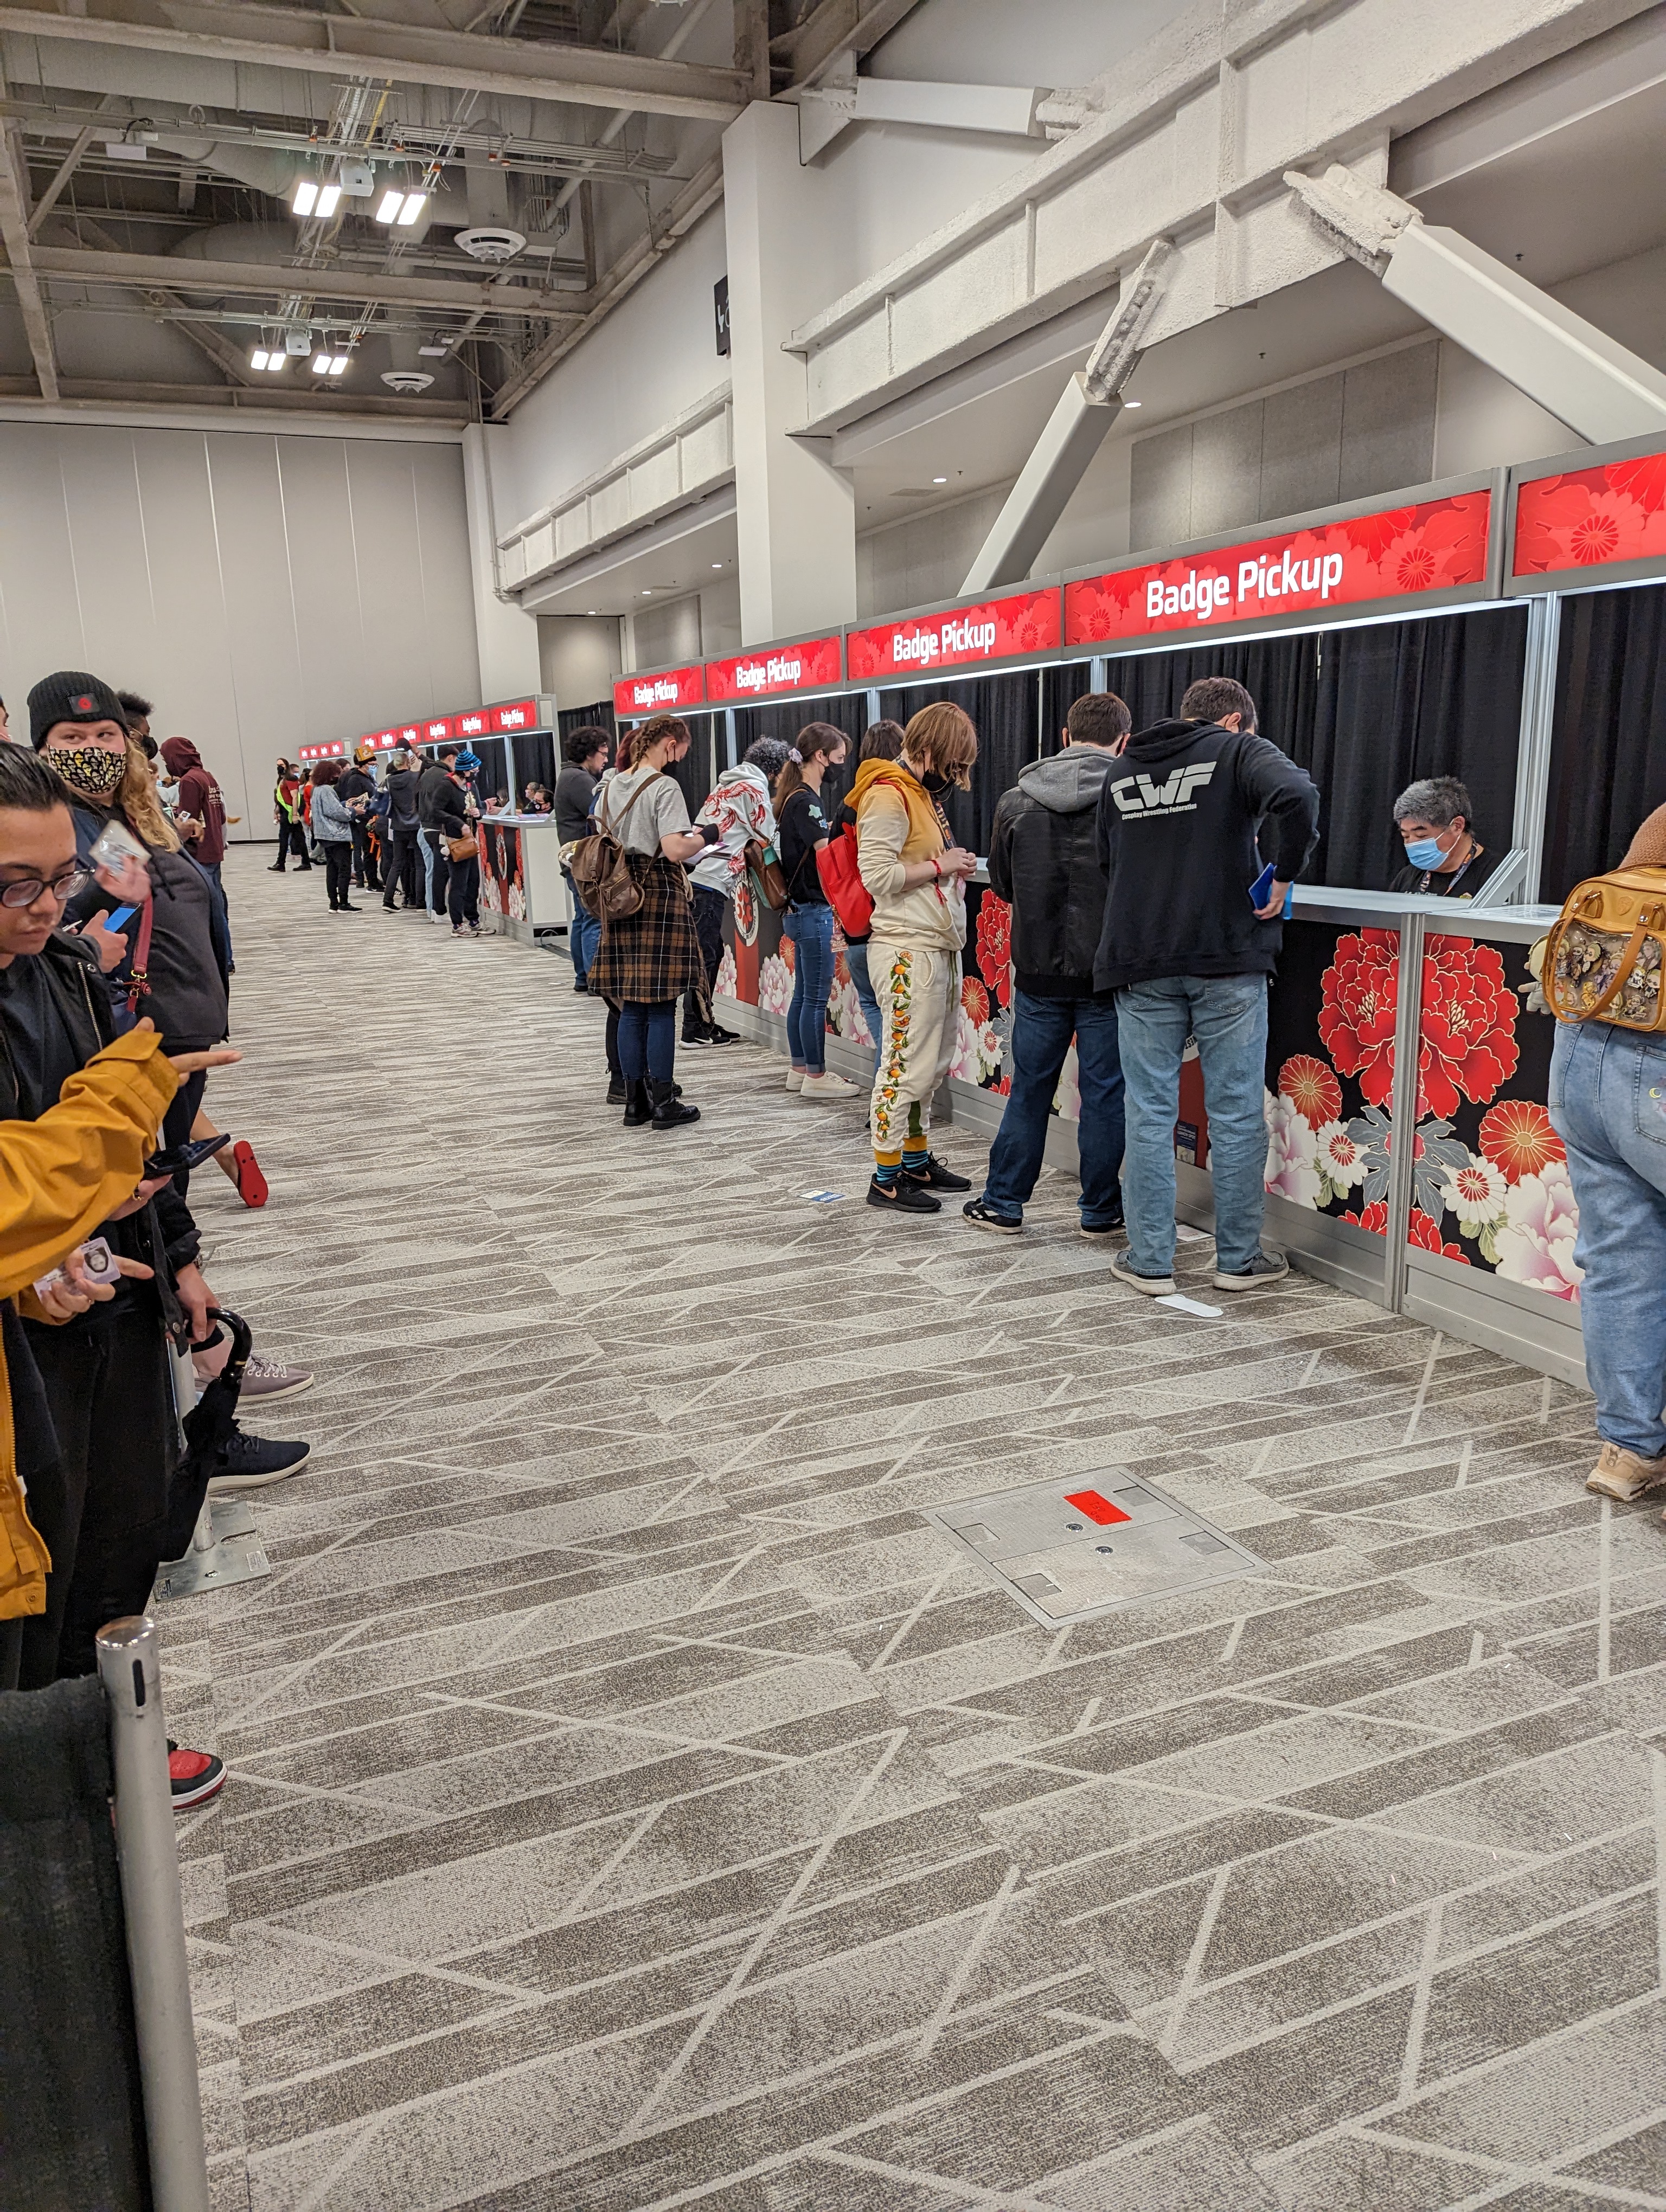 Picture of twelve badge pickup booths, all serving
people